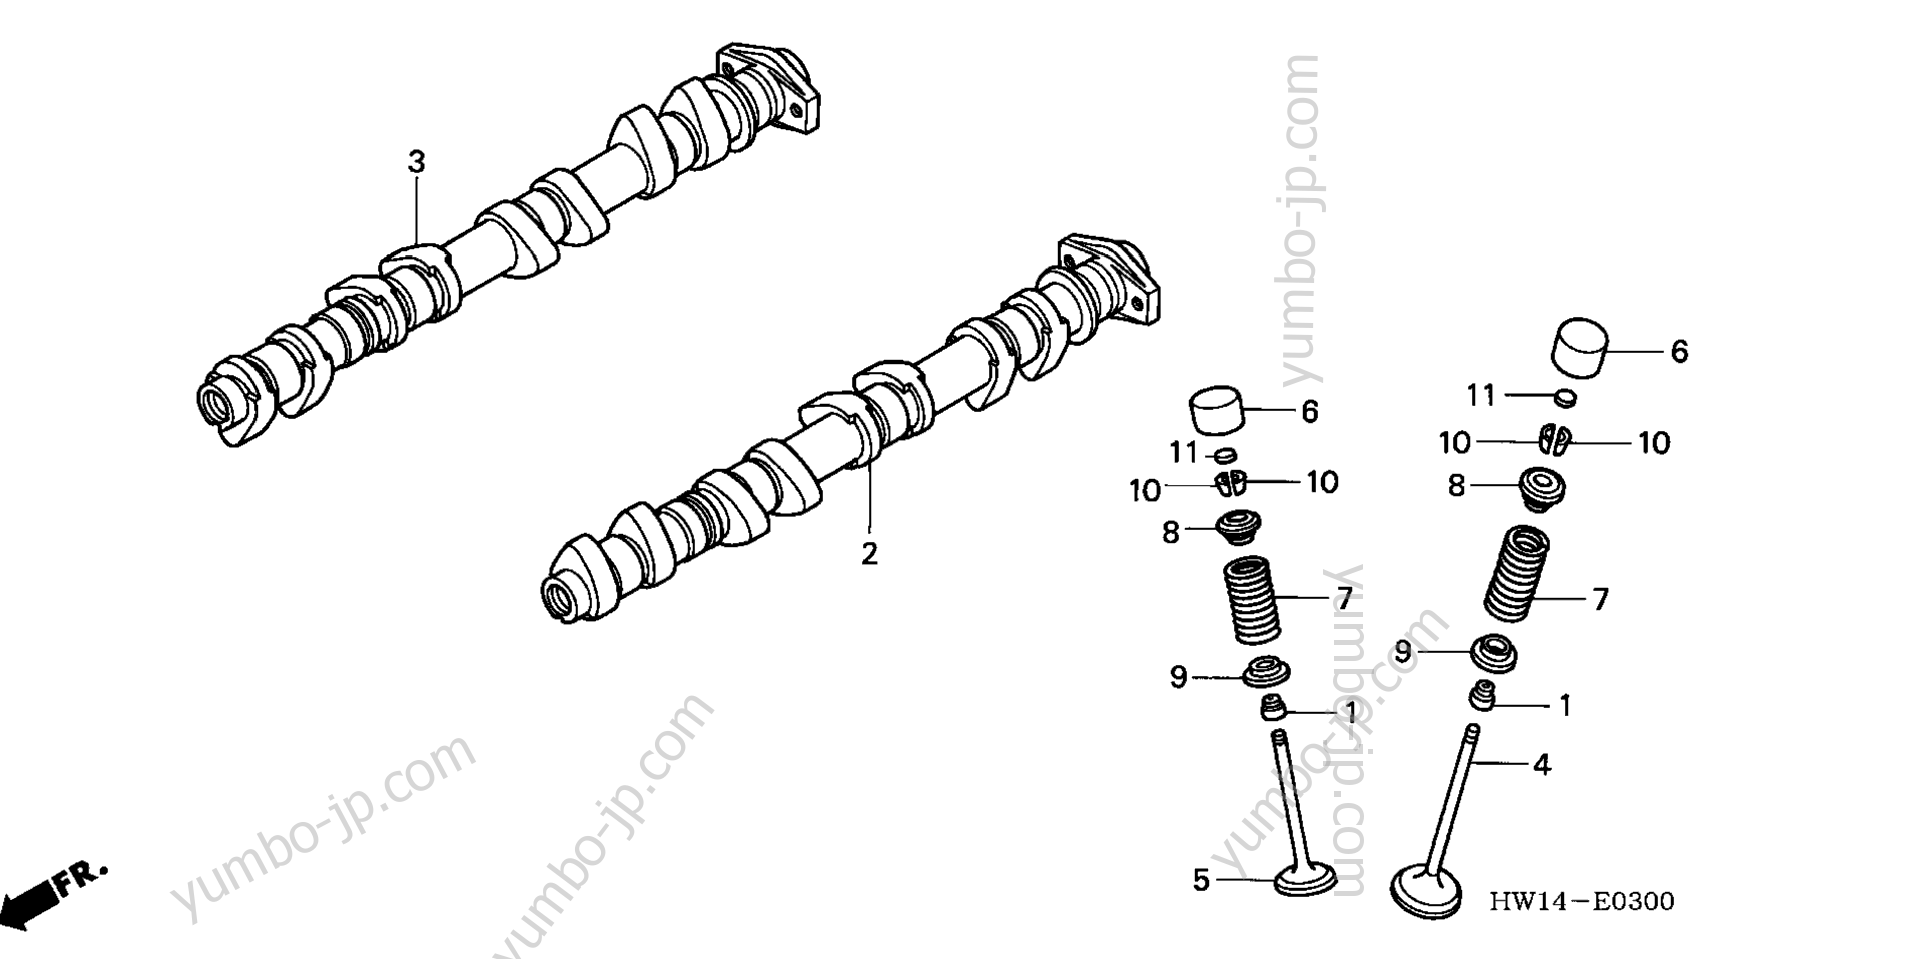 CAMSHAFT / VALVE for watercrafts HONDA ARX1200T2 A 2004 year